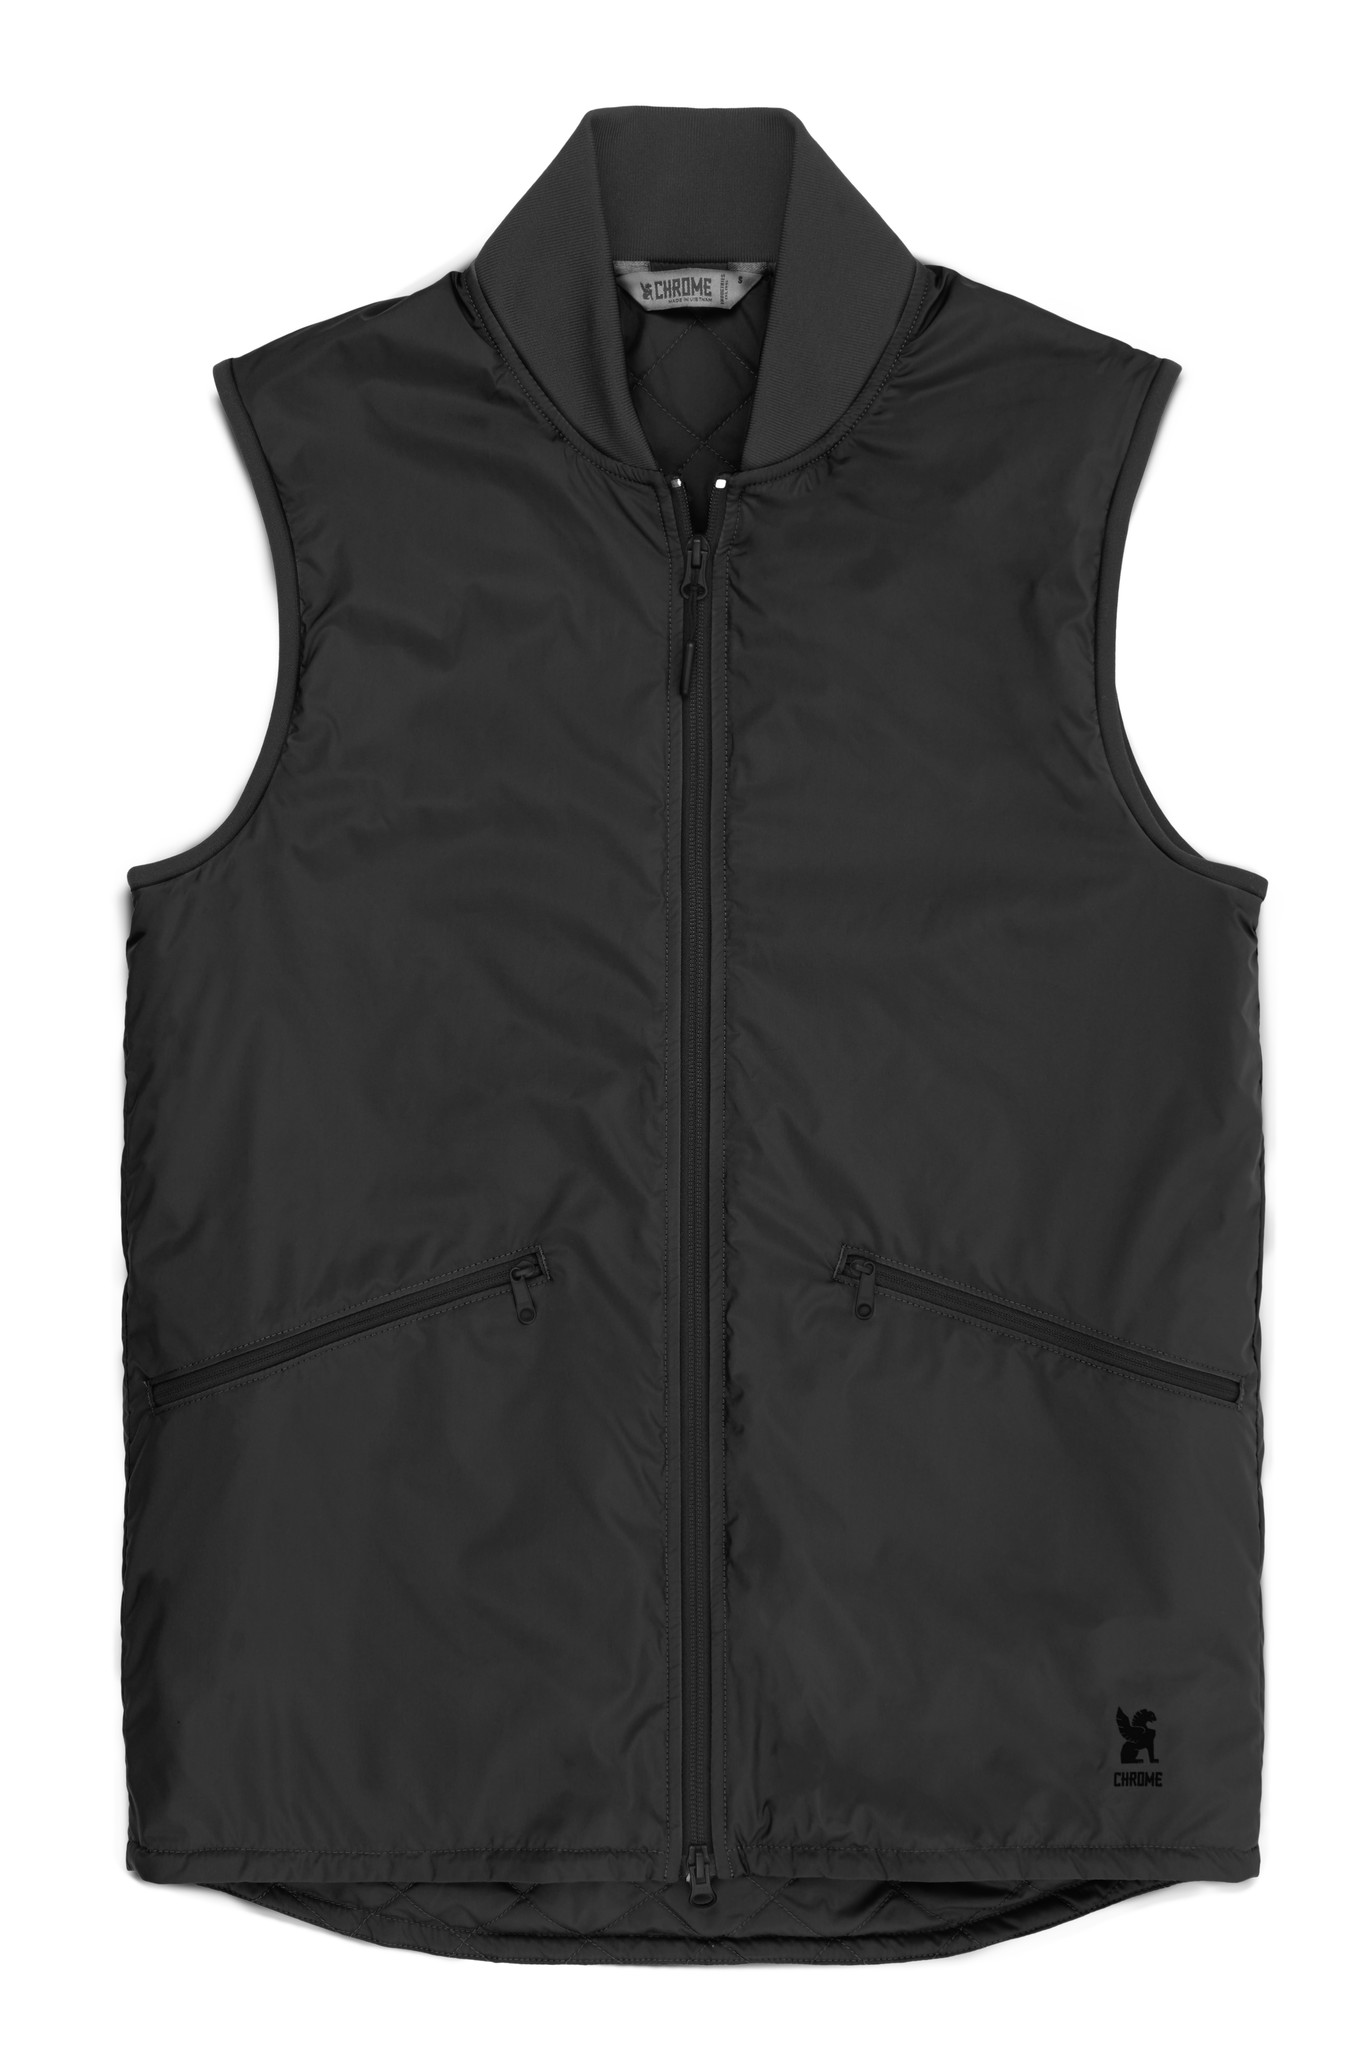 Chrome Industries Bedford Insulated Vest Black - Simple Bike Store